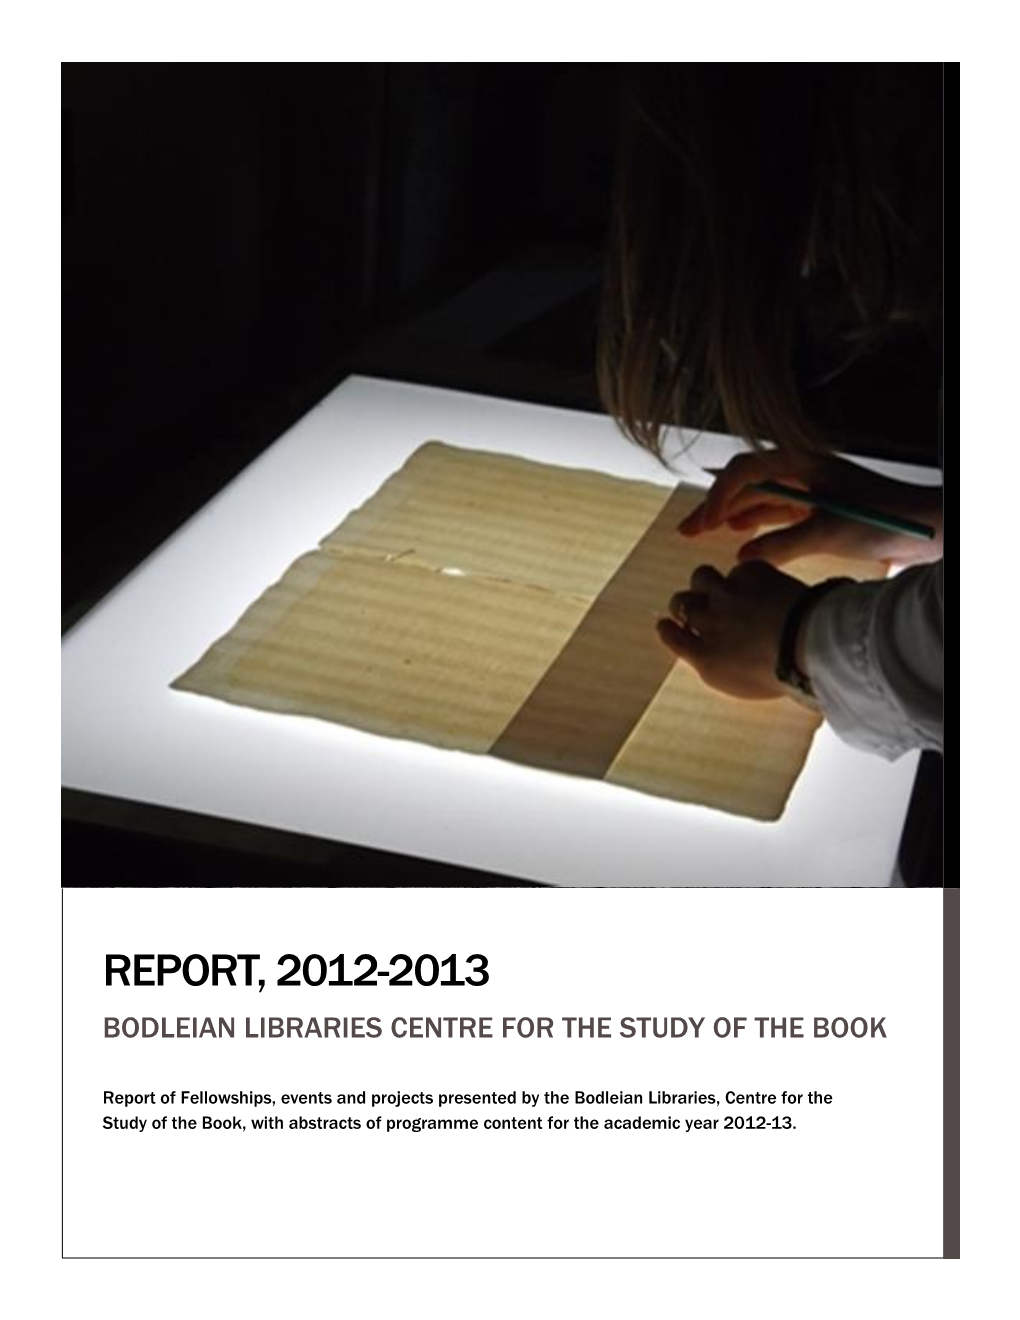 Report, 2012-2013 Bodleian Libraries Centre for the Study of the Book